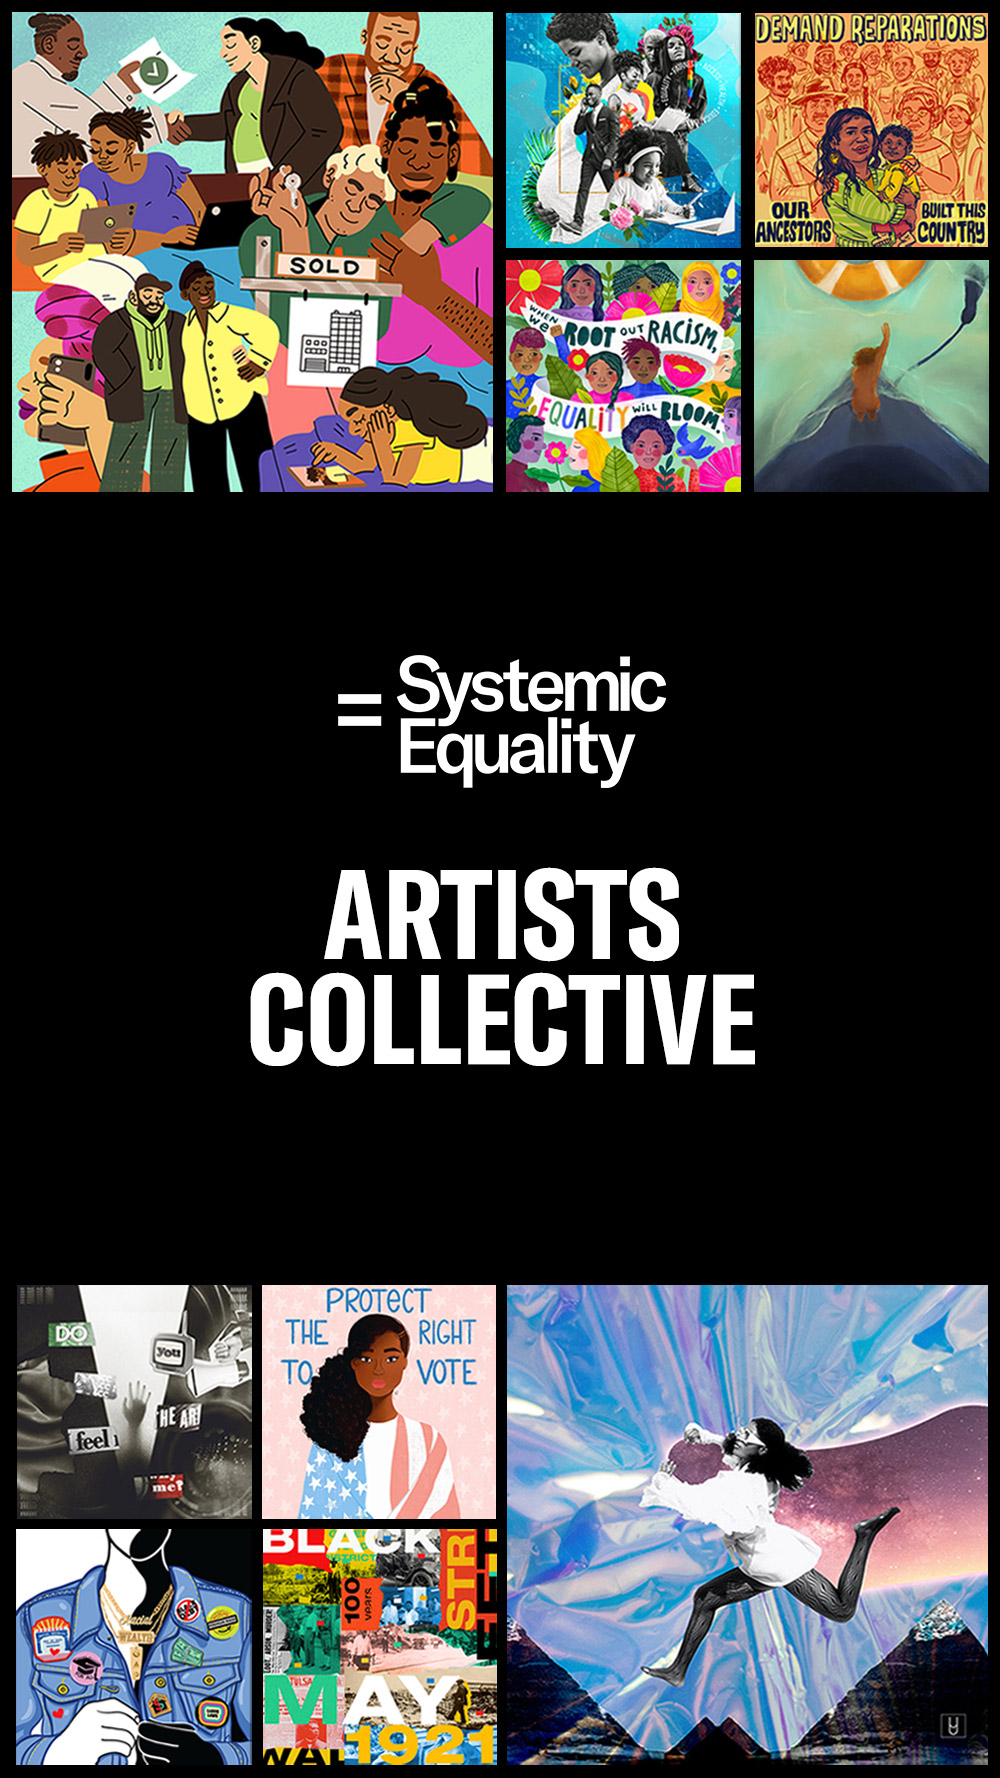 A banner containing the visual art pieces from the 10 emerging artists, with the words "Systemic Equality Artists Collective" in the center of the banner.